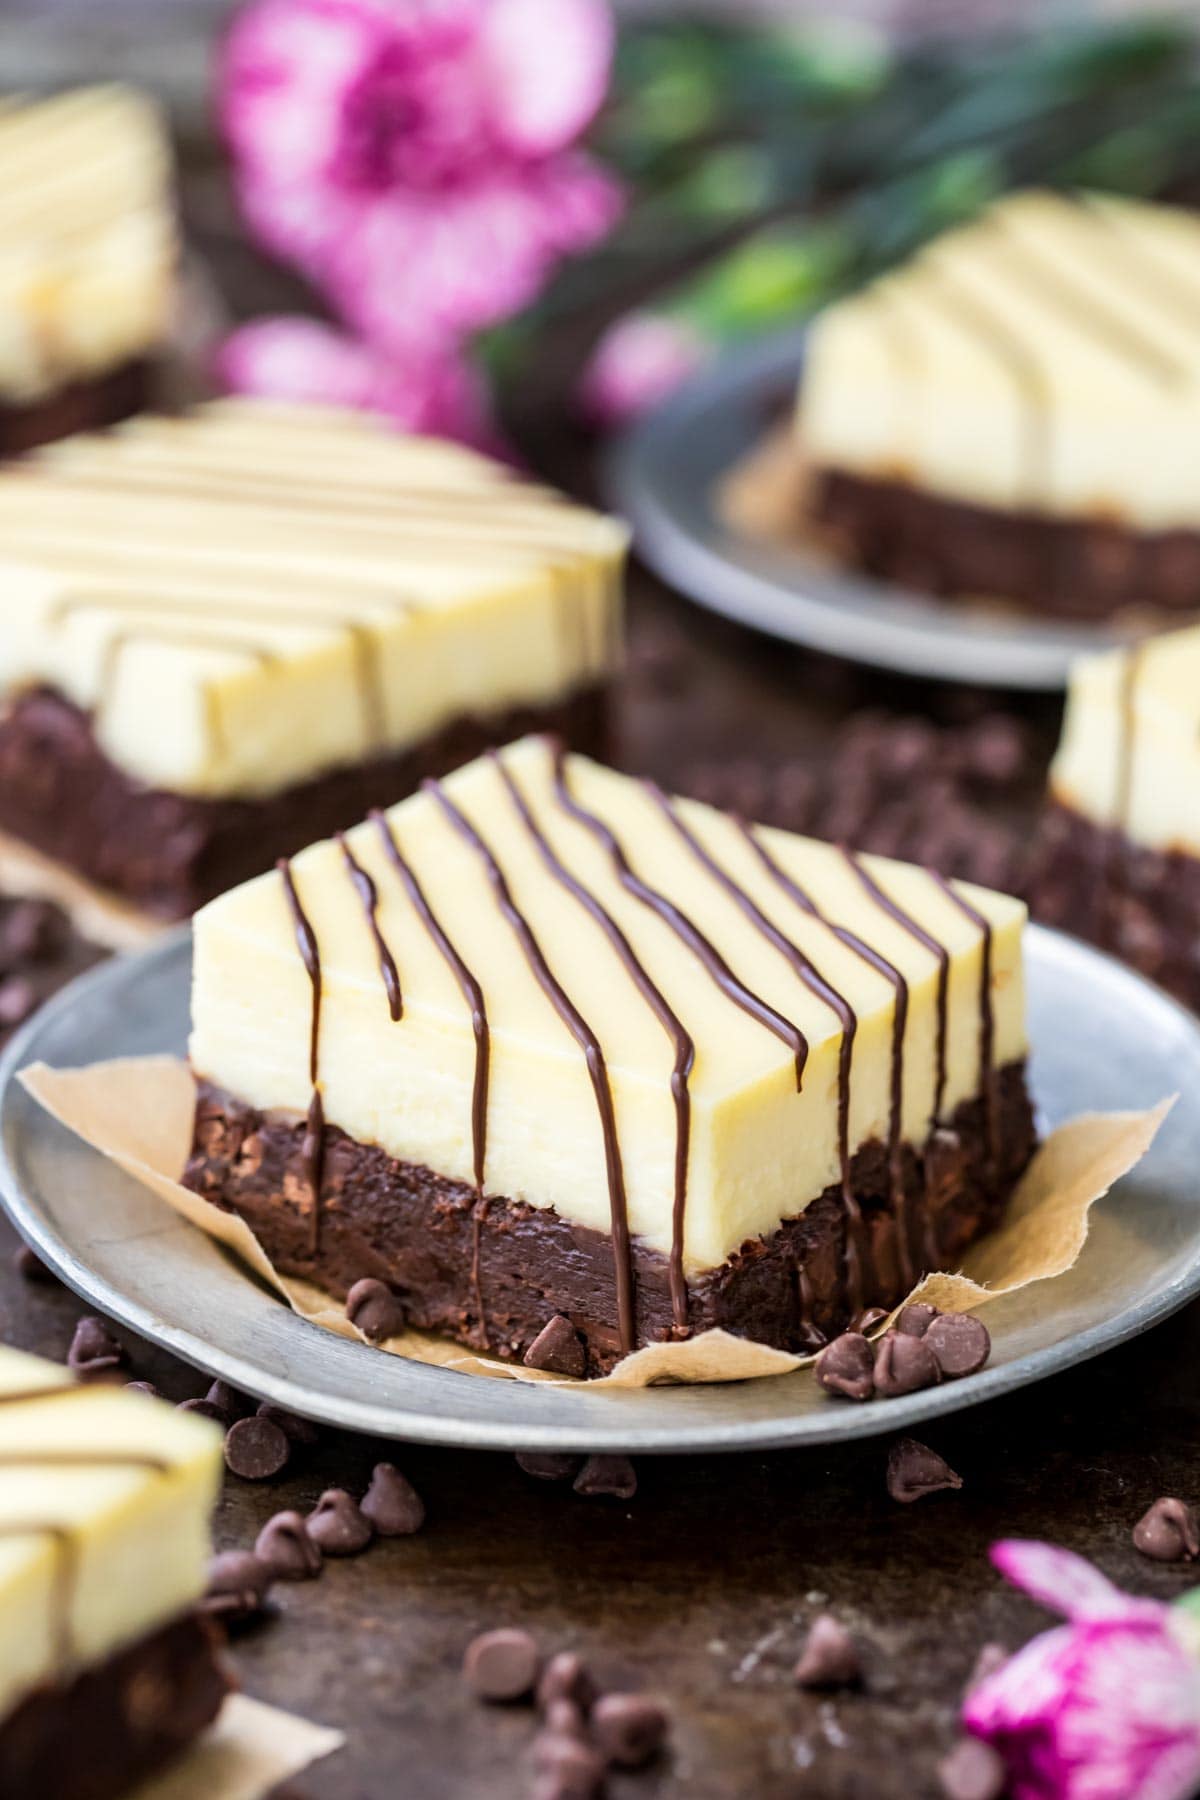 Cheesecake brownie on a gray plate.